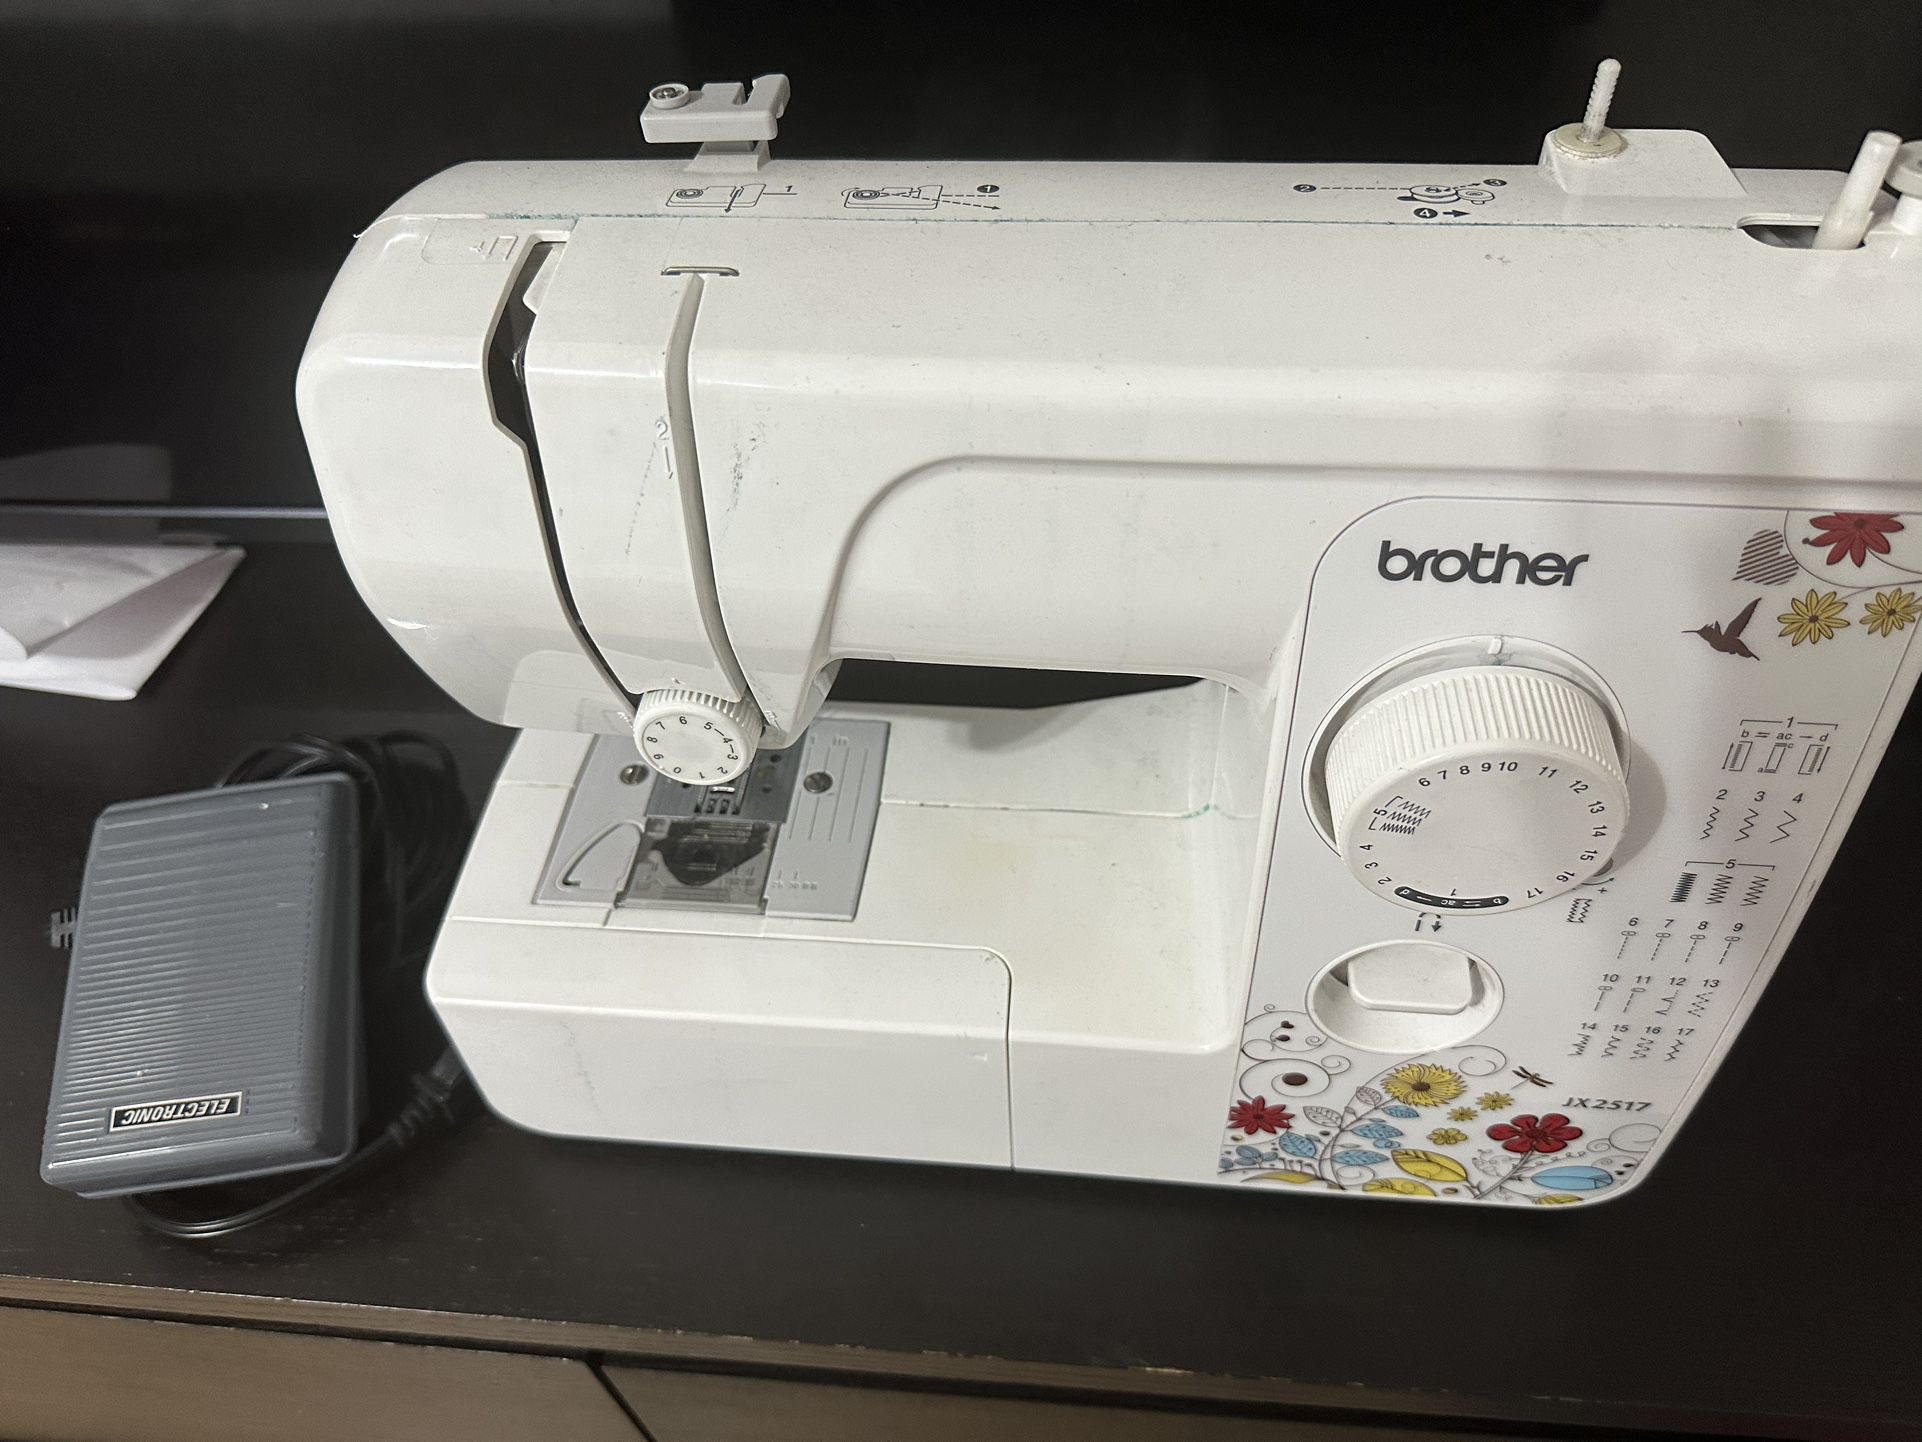 Sewing Machine JX2517 Brother